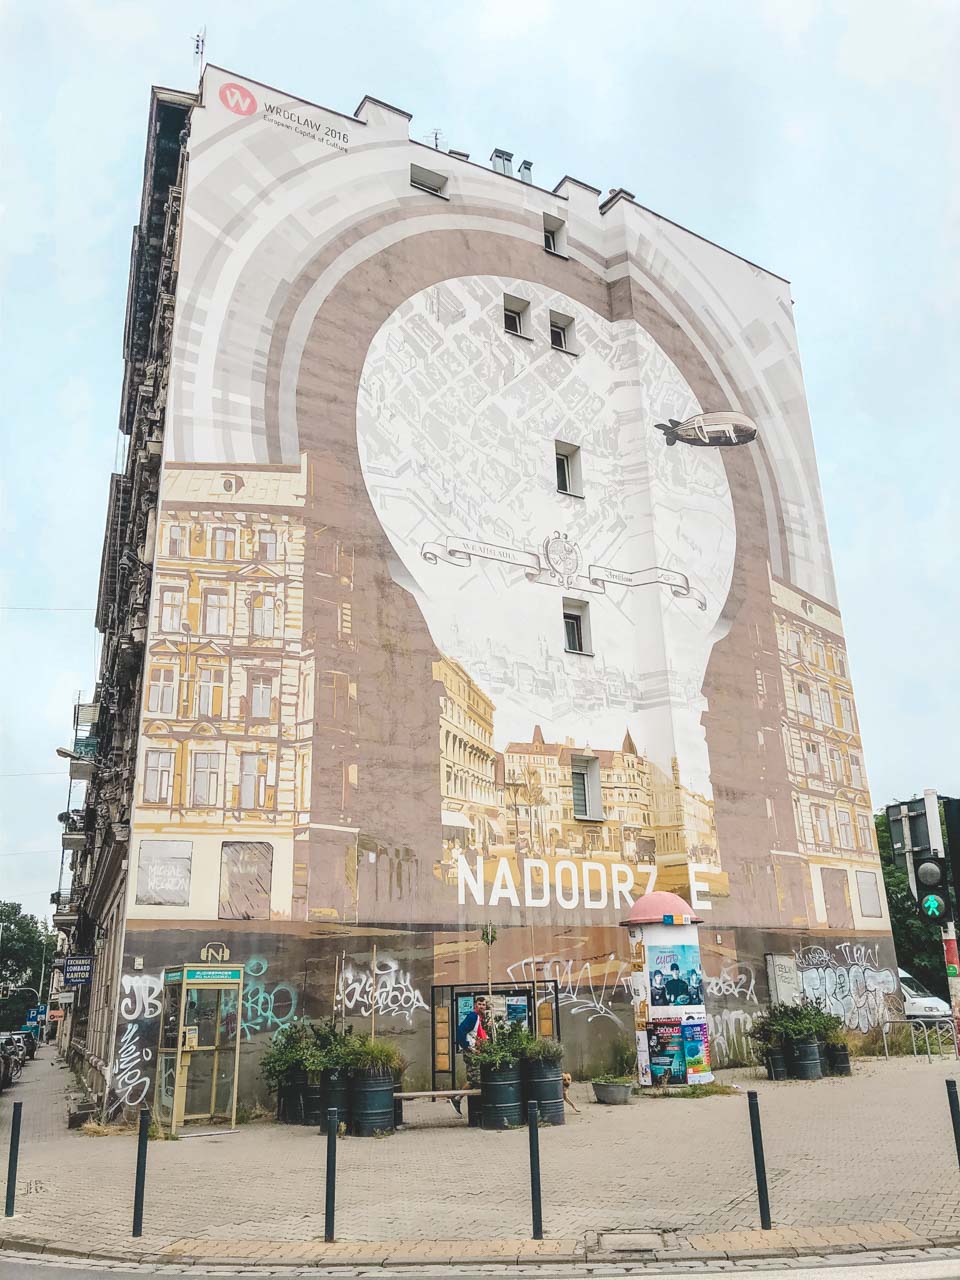 A large mural located in the Nadodrze district of Wrocław